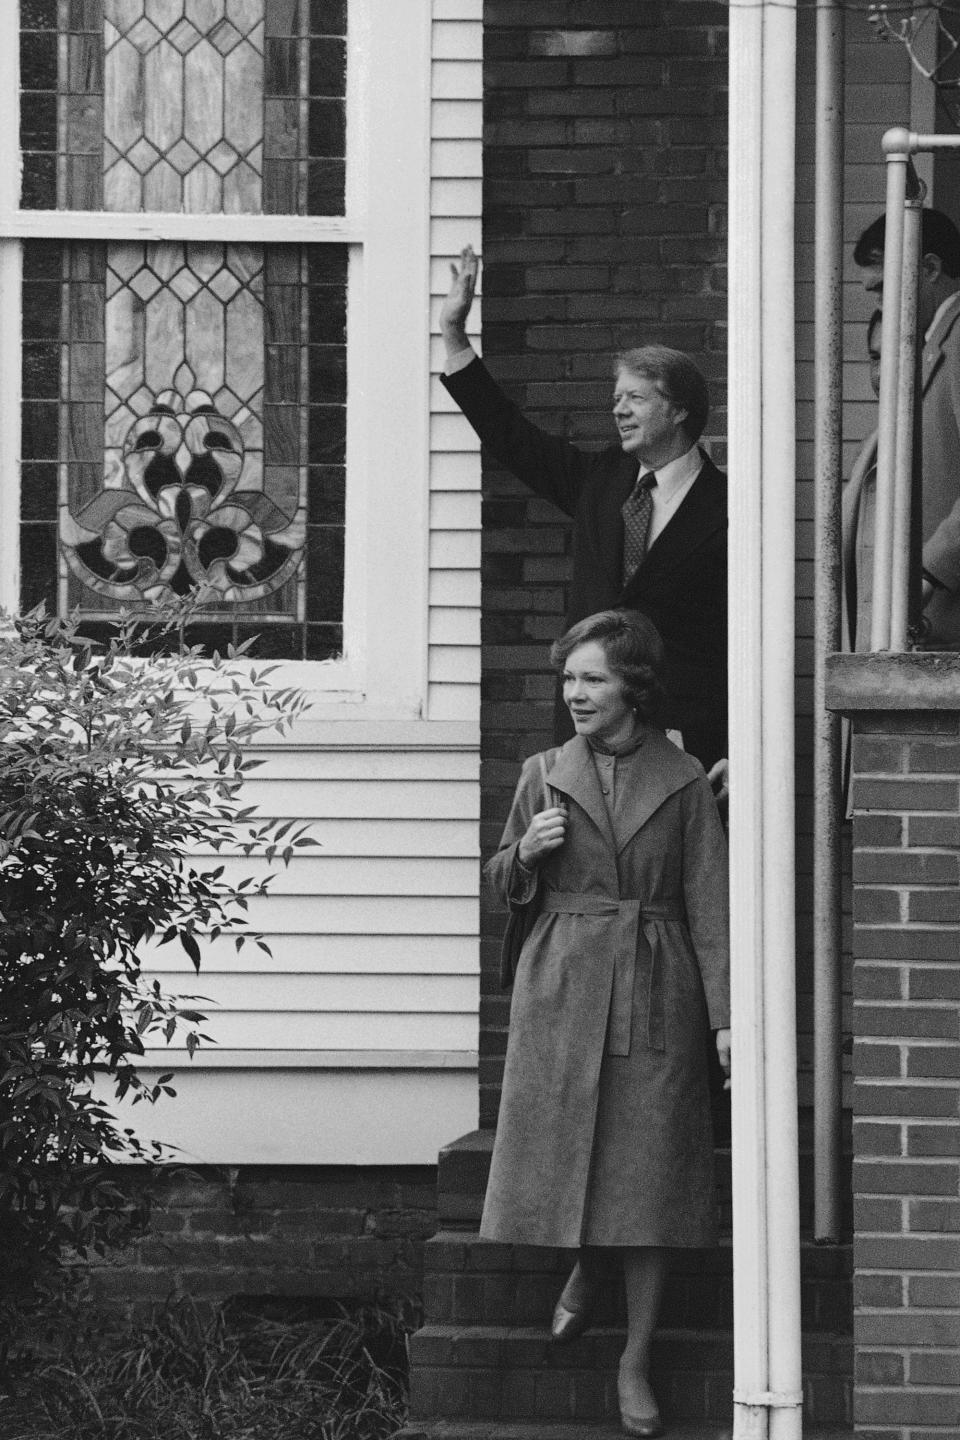 President Jimmy Carter and his wife Rosalynn leave the First Baptist Church in Plains, Georgia Dec. 26, 1977 where they attended Sunday School. They then attended Christmas services at the Maranatha Baptist Church a few miles outside the President's hometown. (AP Photo)